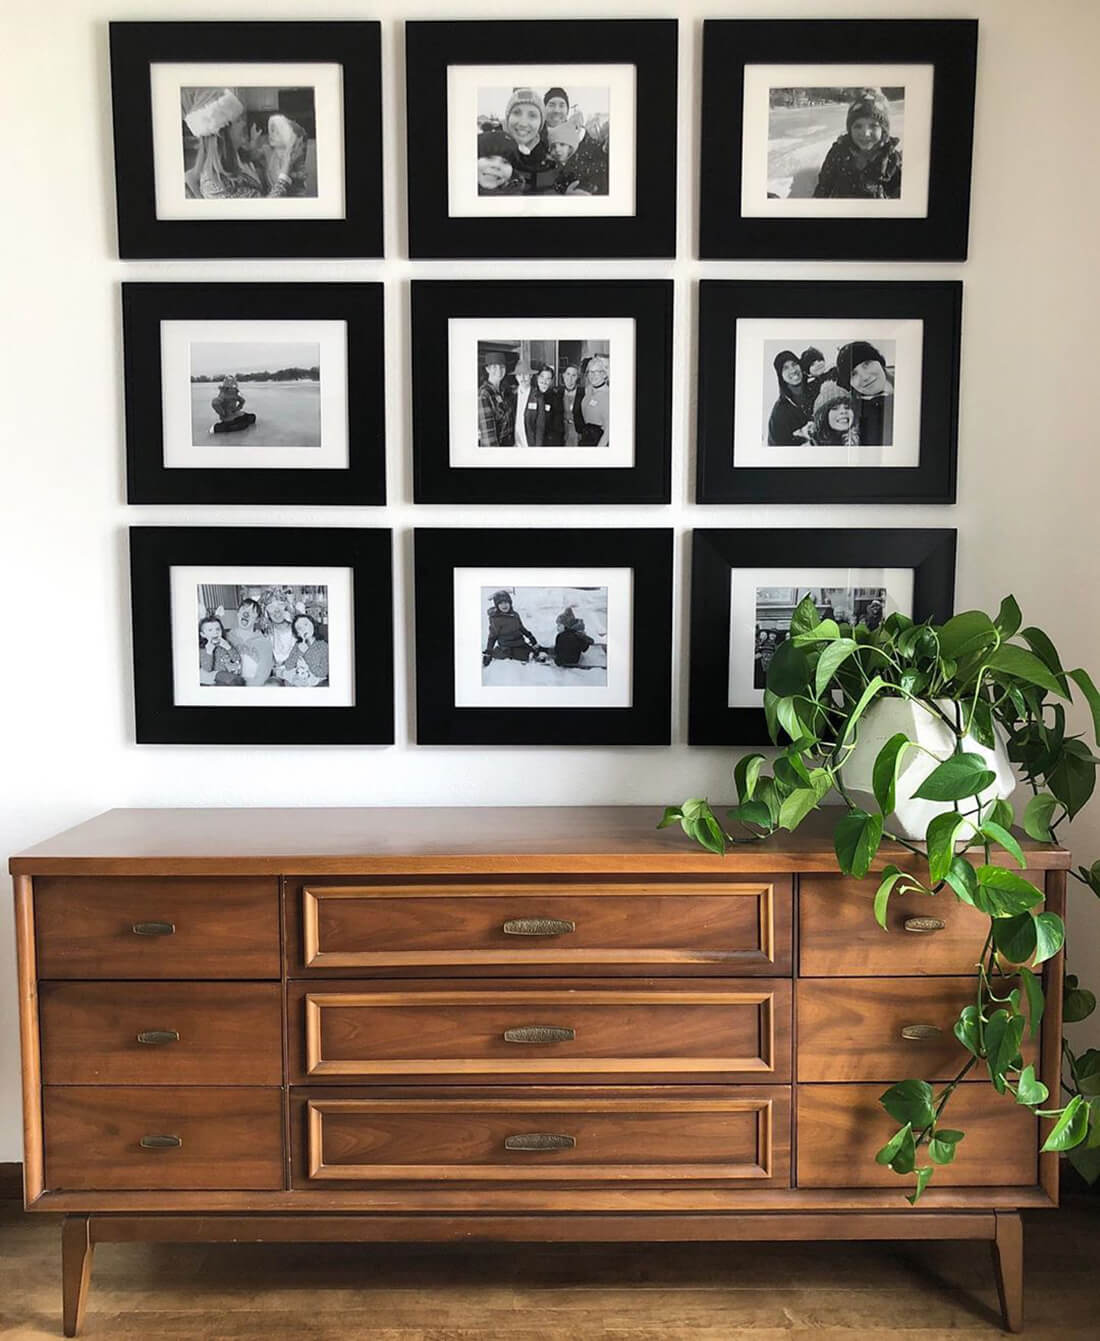 How to Create a Flawless Photo Gallery Wall in 5 Easy Steps • Little Gold Pixel #familyphotos #gallerywall #gallerywallideas

Photo © Kate Chipinski